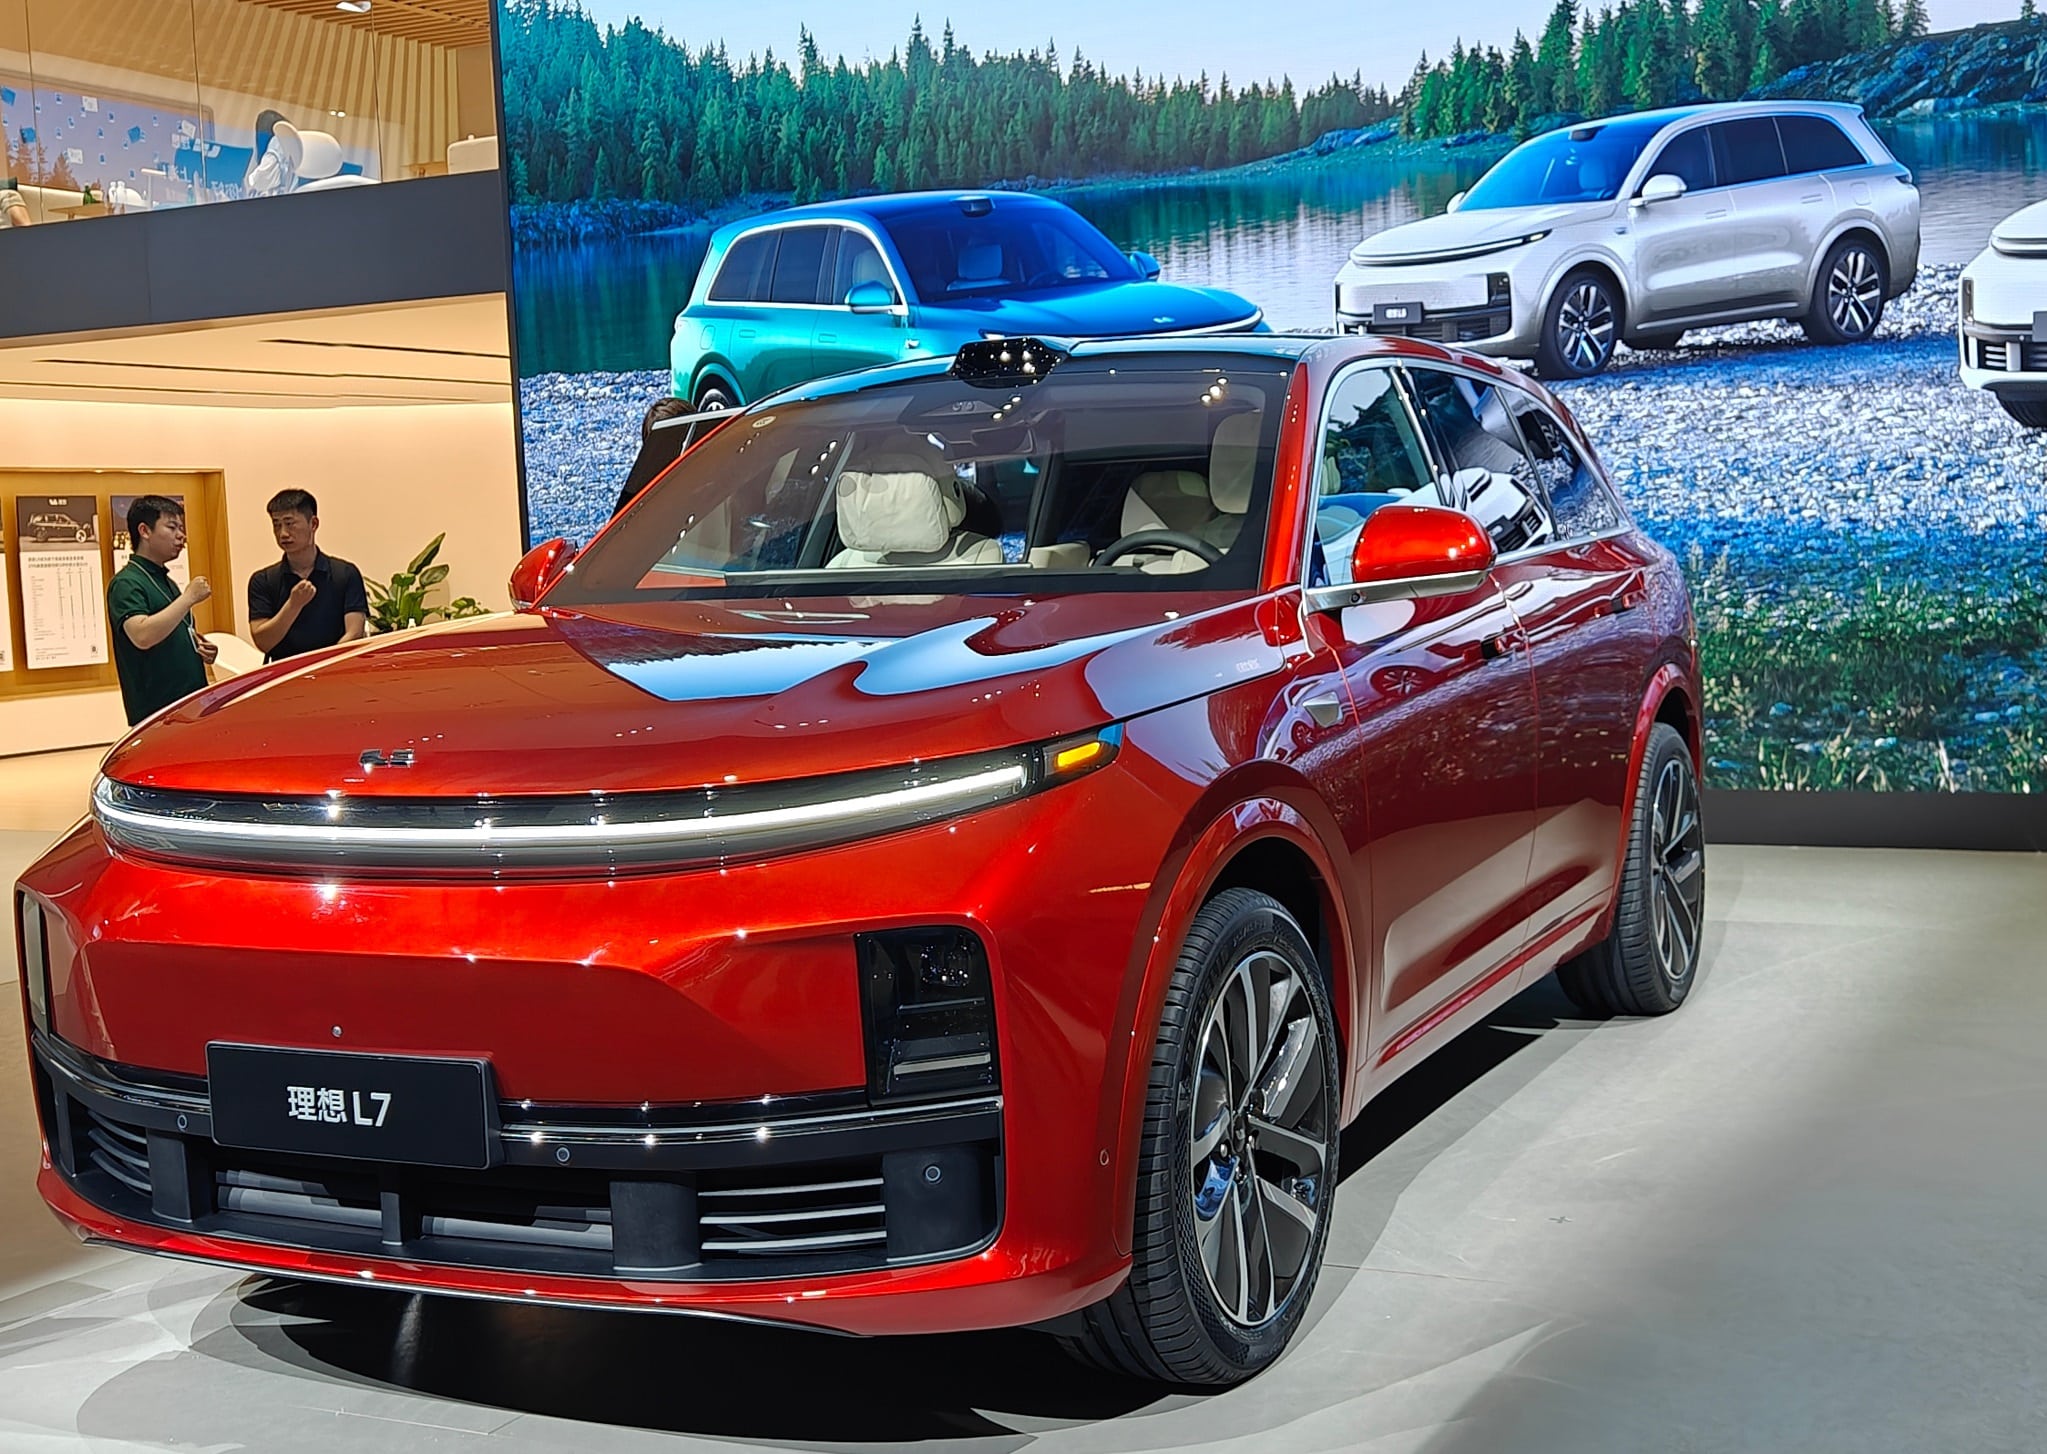 Li Auto's first pure EV will get CATL's Qilin battery. To launch 5 BEV  models by 2025